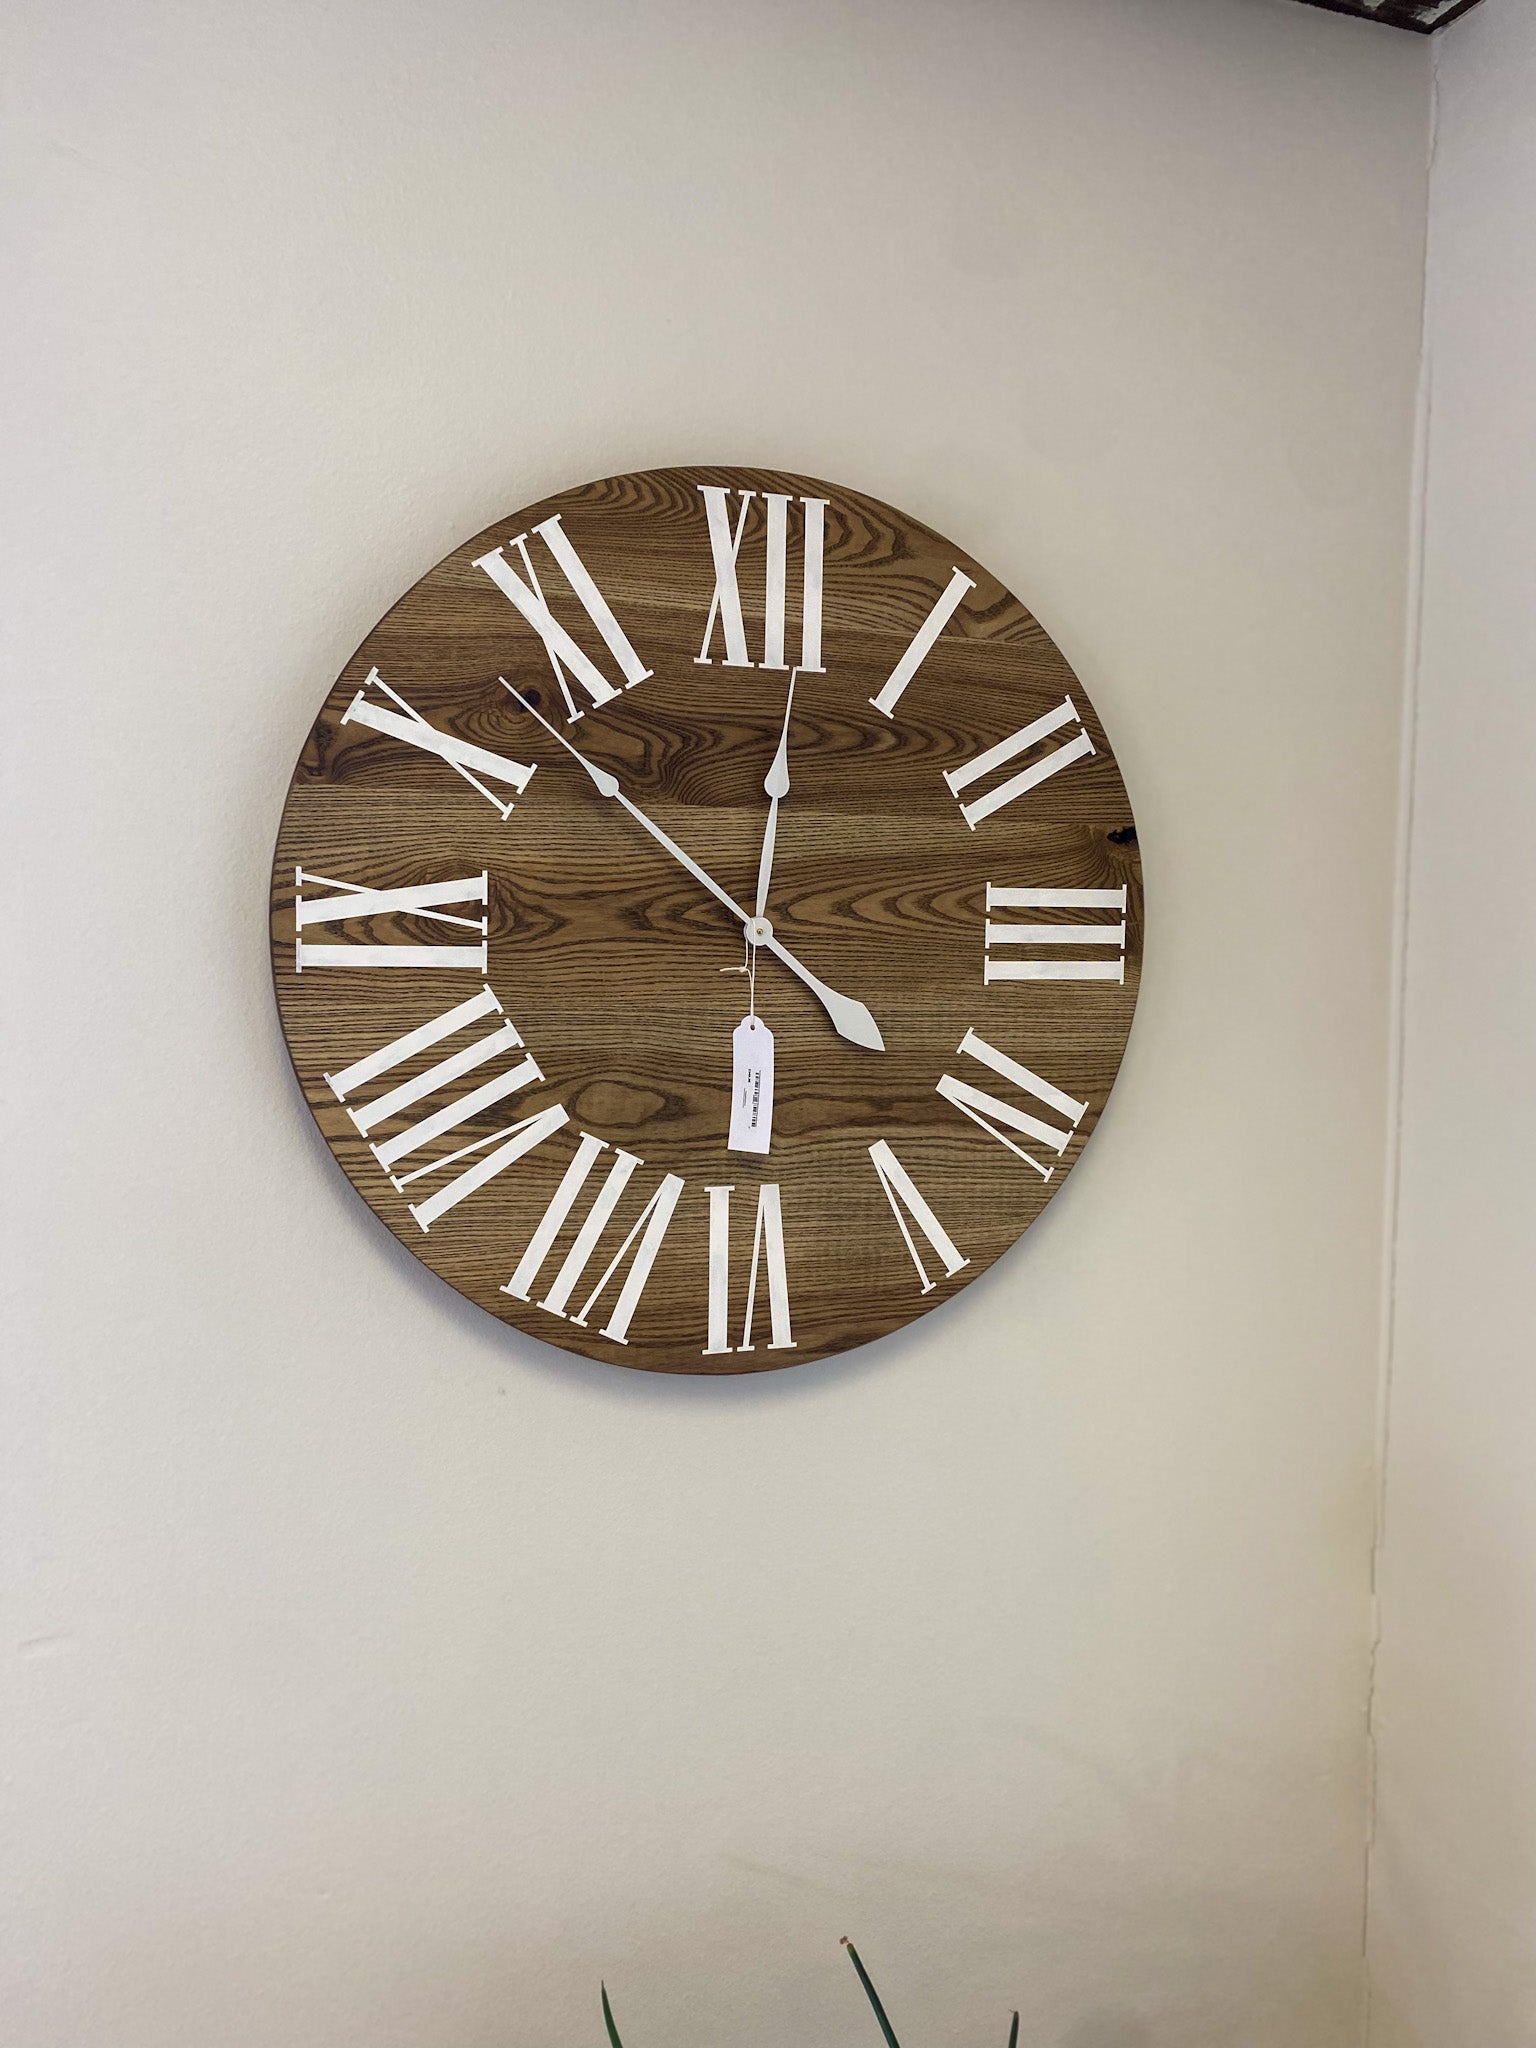 Dark Stained Solid Ash Wood Wall Clock with White Roman Numerals - Hazel Oak Farms